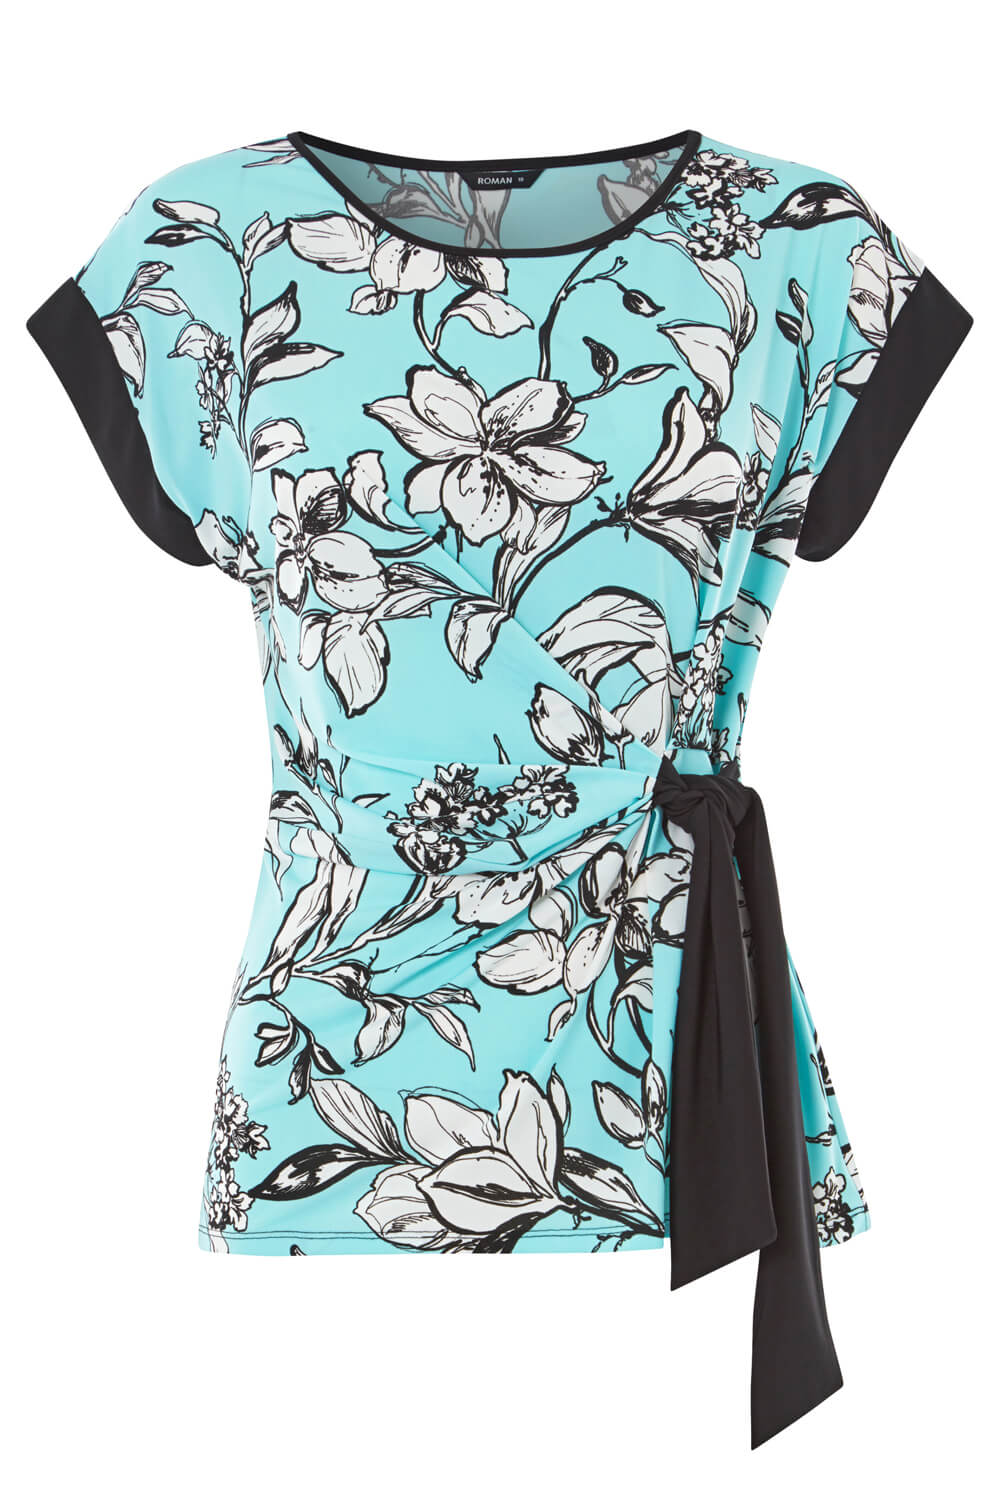 Turquoise Tie Waist Floral Top, Image 5 of 5